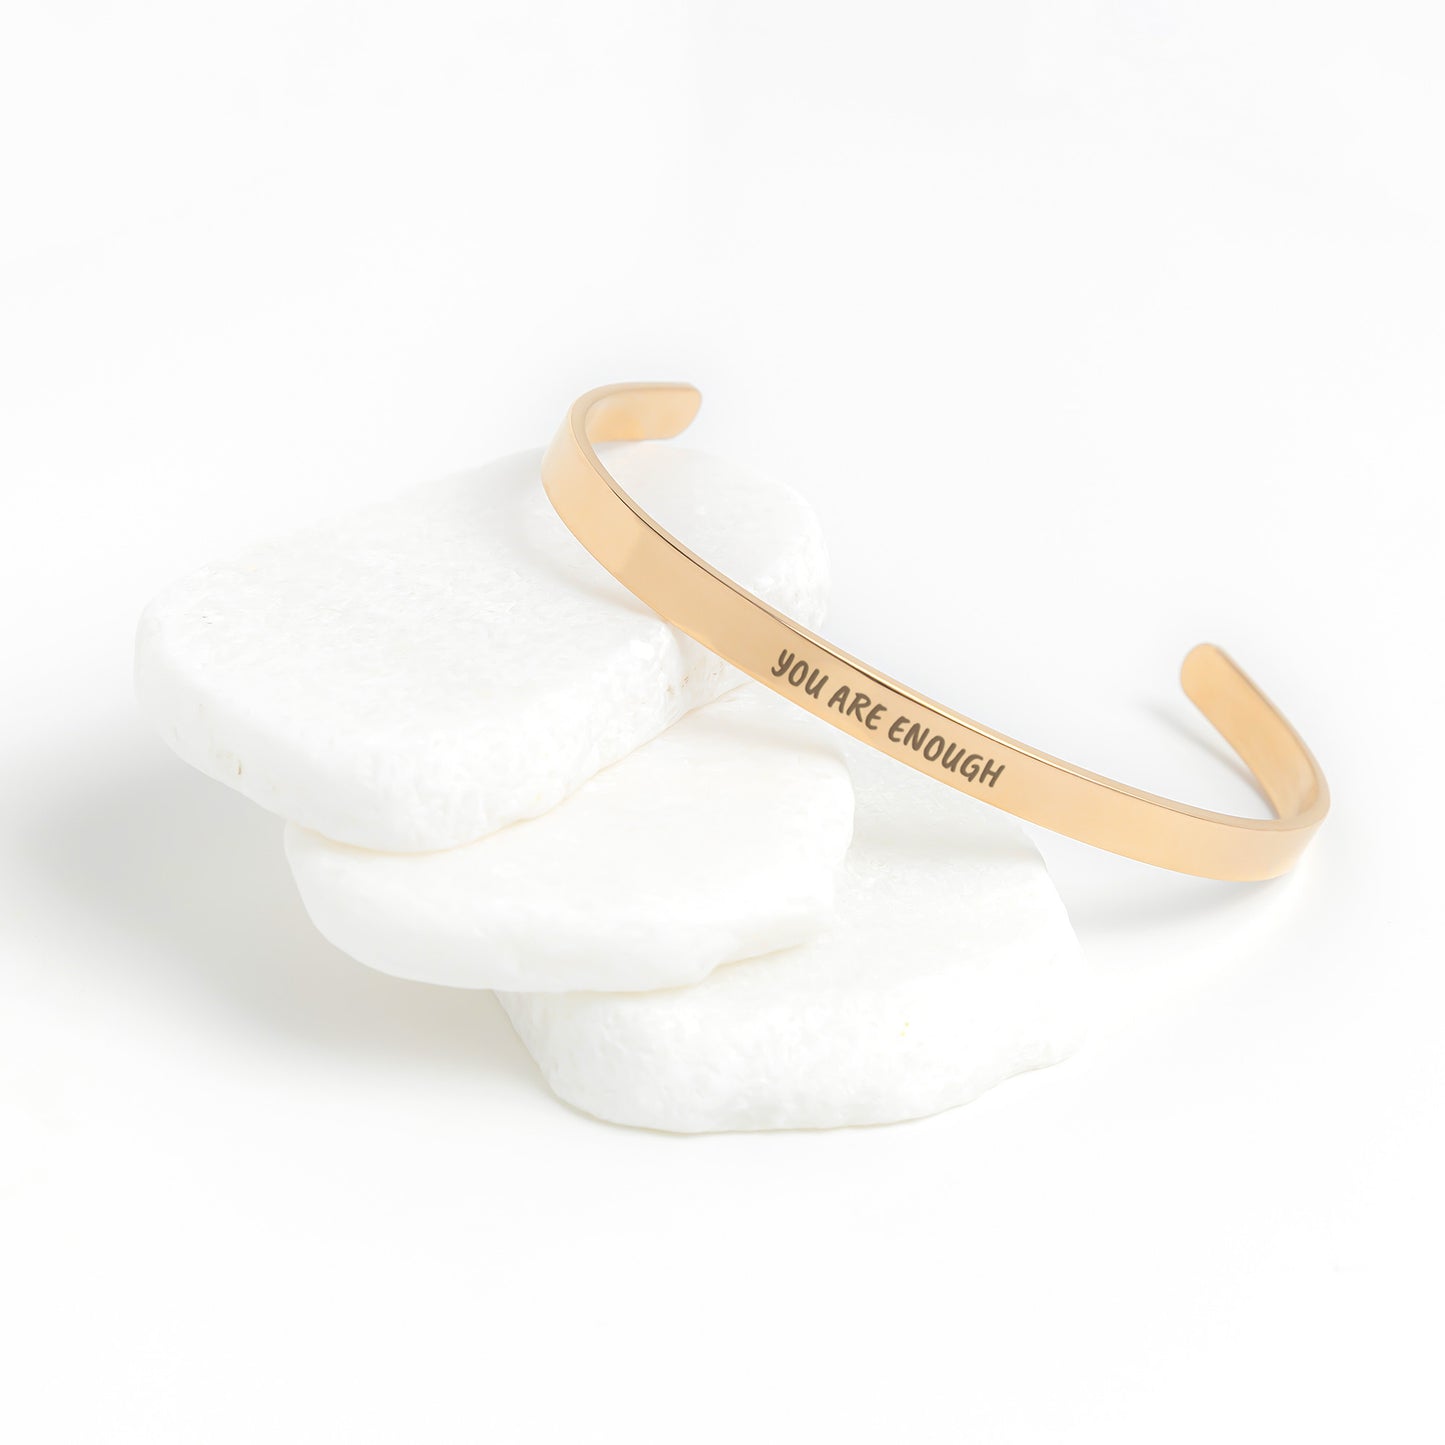 You Are Enough Cuff Bracelet